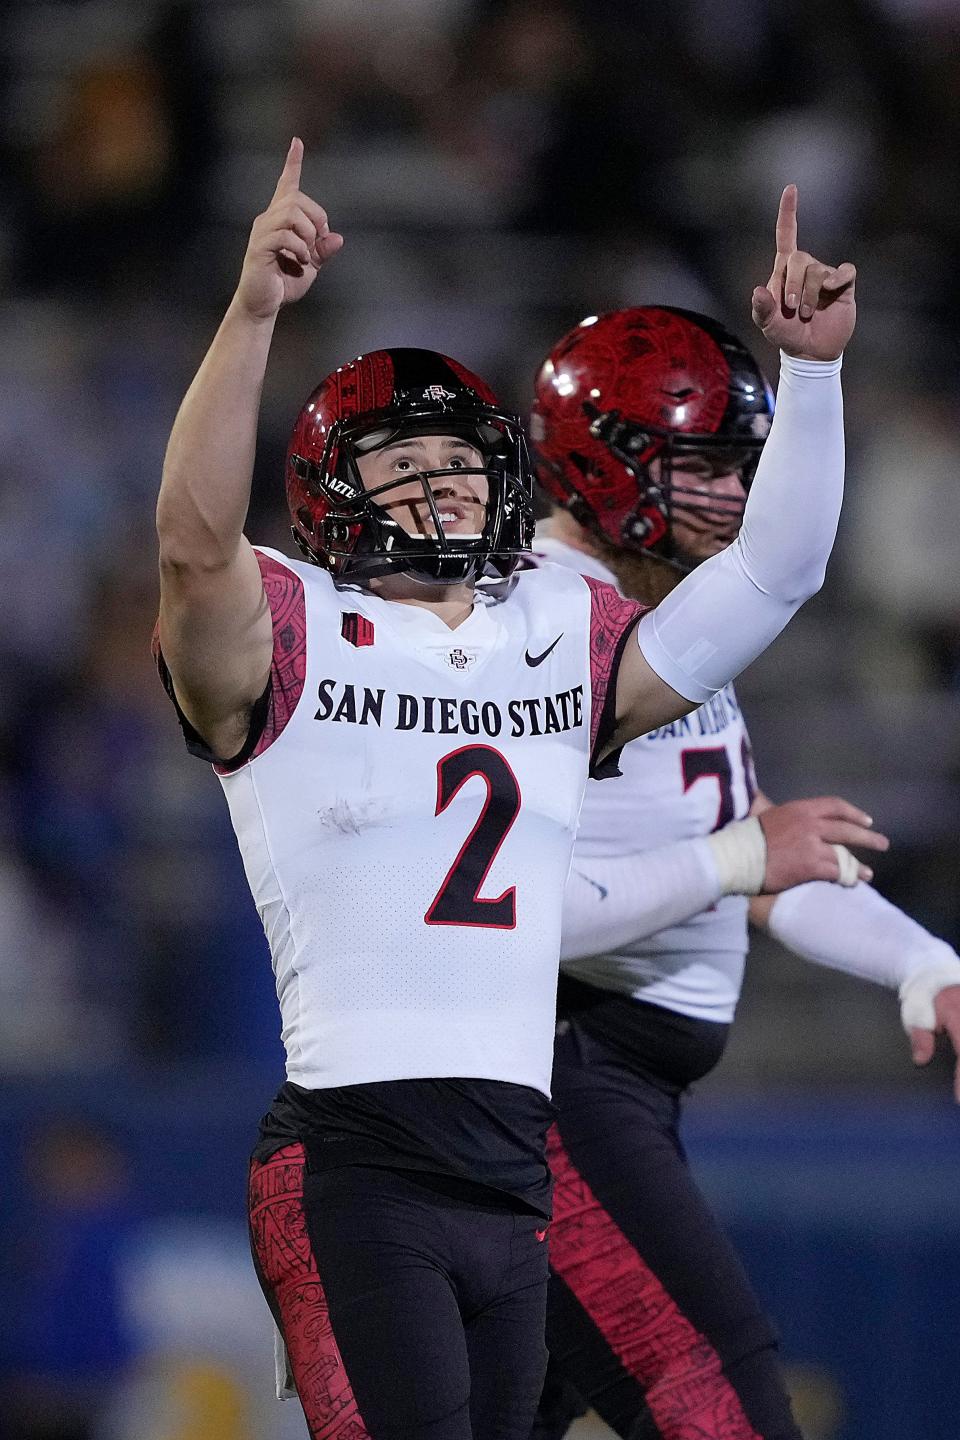 Matt Araiza played for the Aztecs for three seasons and is one of three former players named in a civil suit that alleges they gang-raped a 17-year-old girl in October 2021.